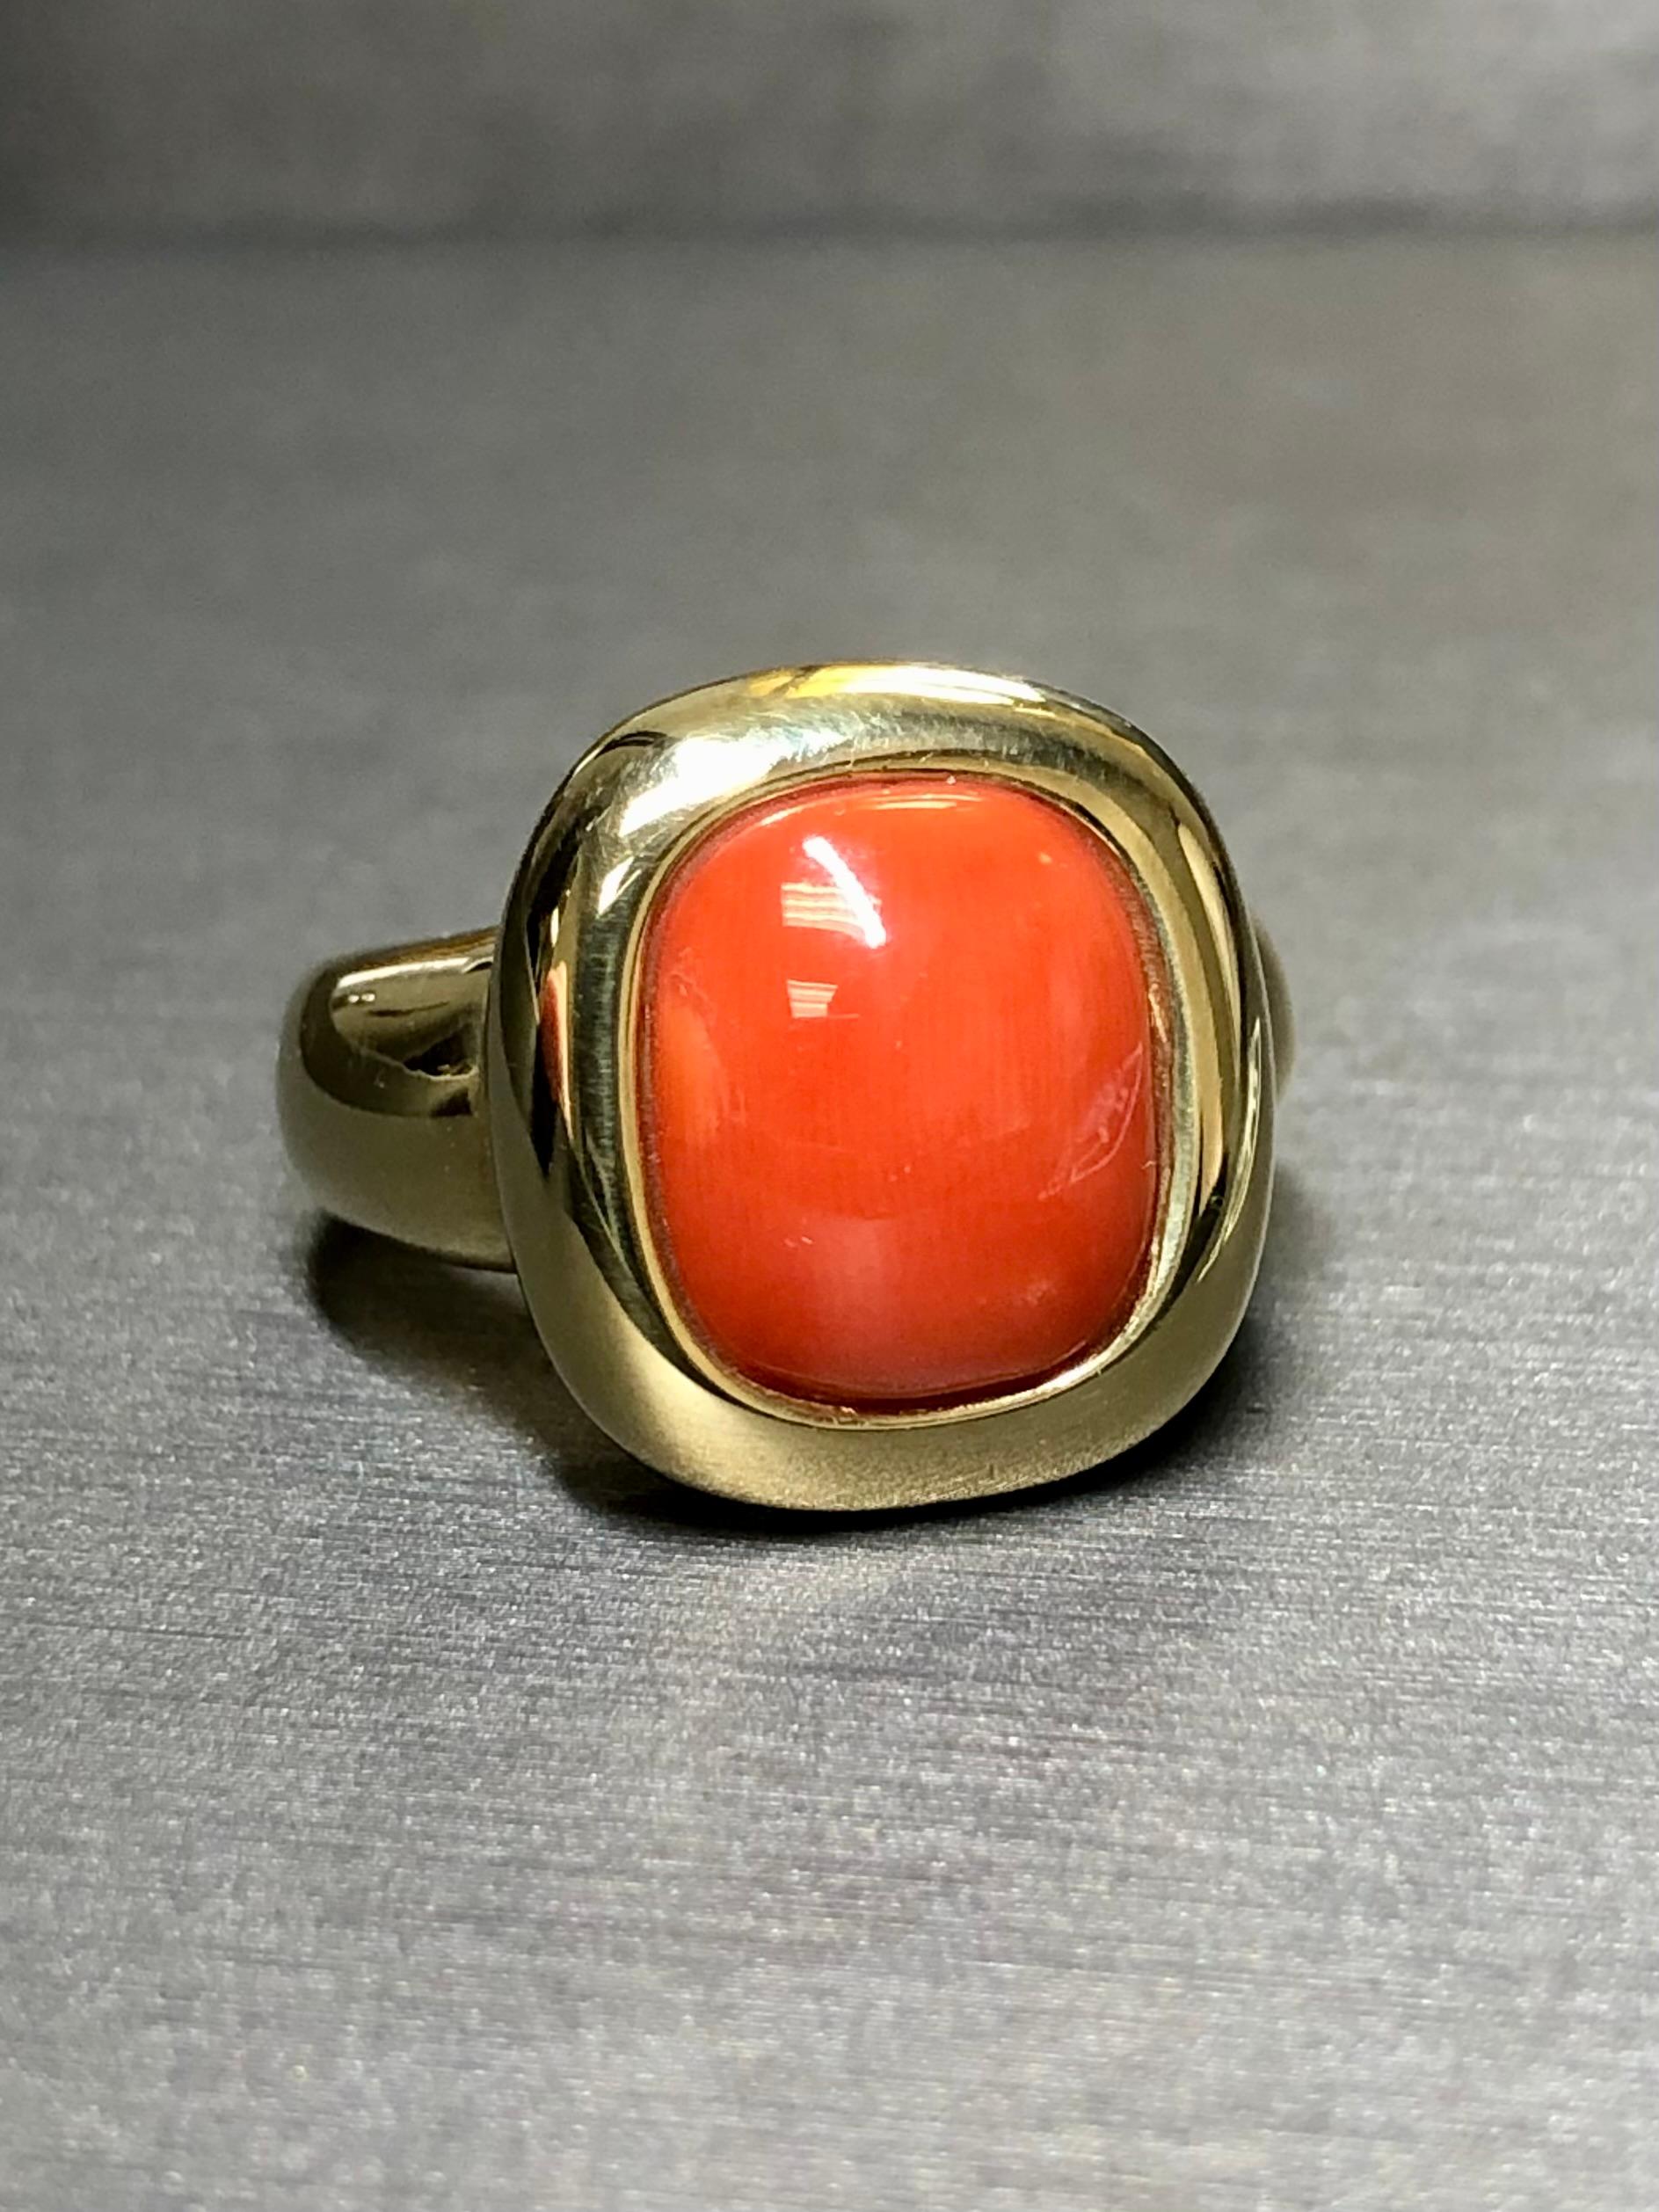 
A simple yet bold statement ring done in high polished 18K yellow gold and centered but a beautifully high polished cushion shaped cabochon red coral. A classic look sure to stand the test of time.


Dimensions/Weight:

Ring measures .70” x .60”